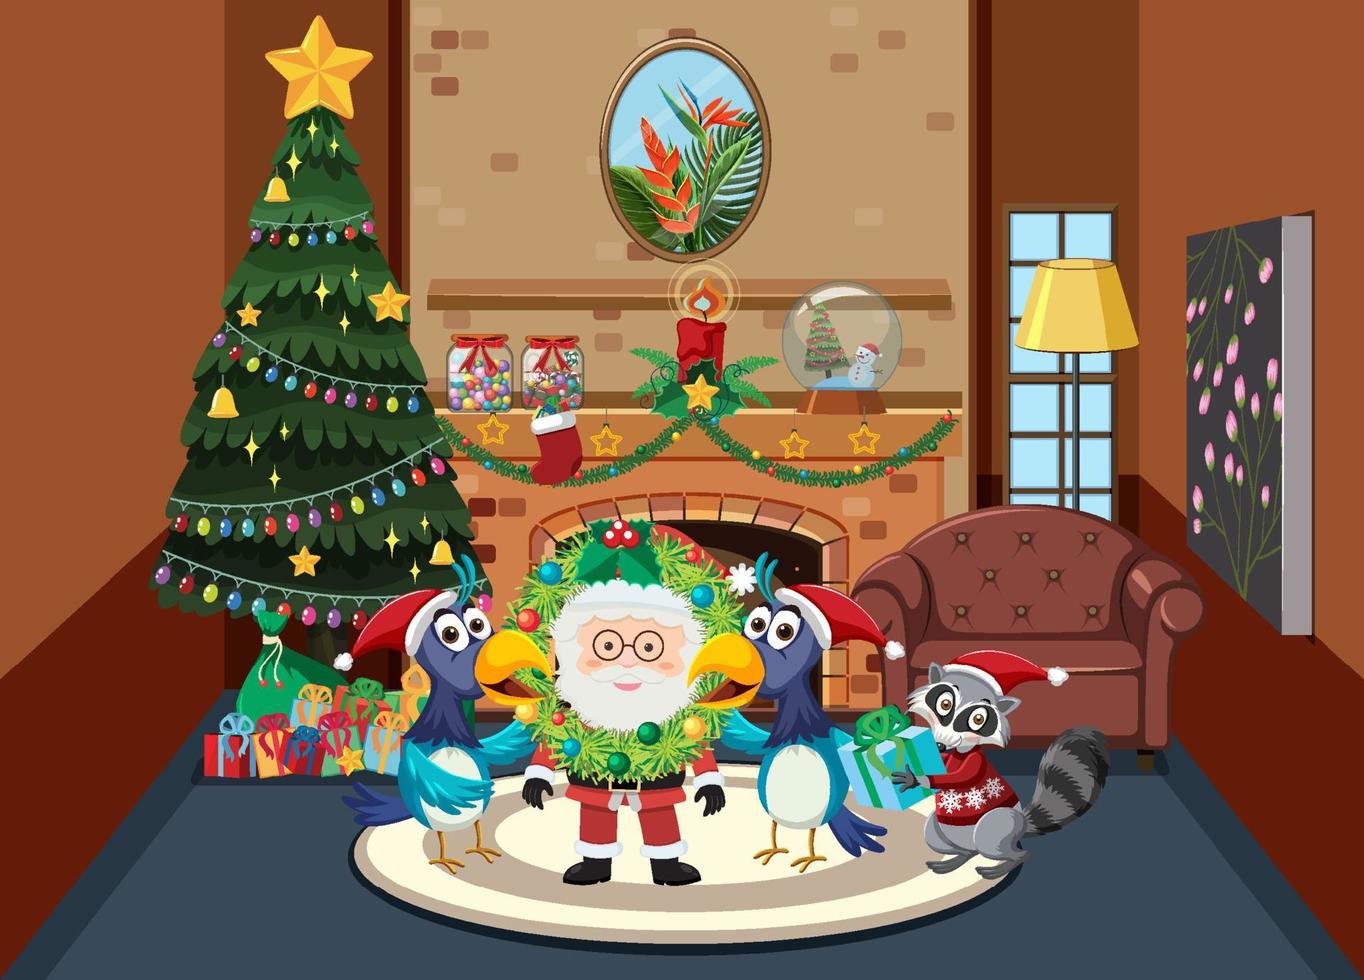 Christmas theme with Santa by fireplace vector